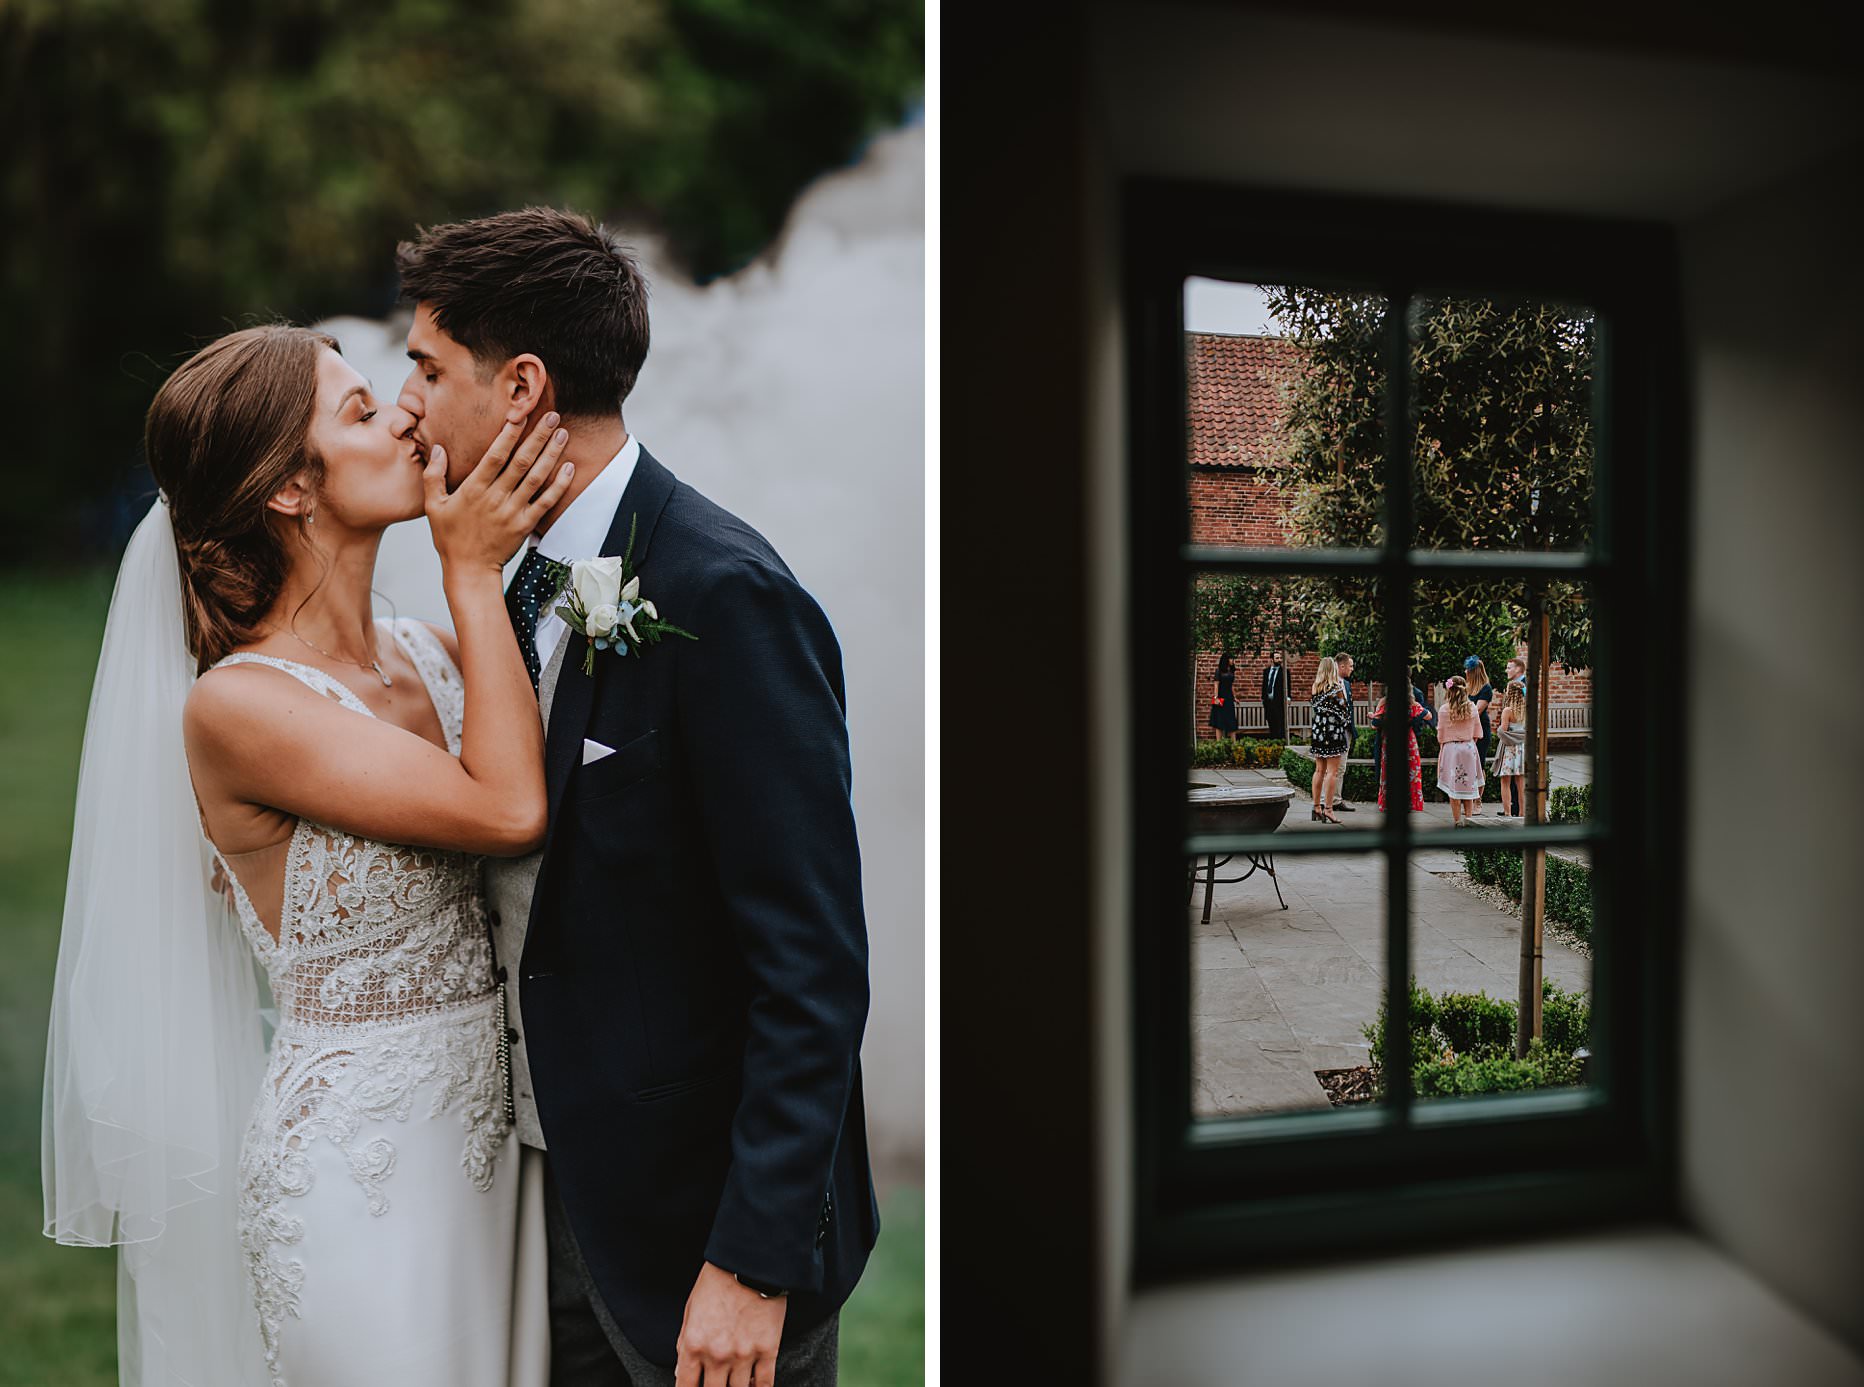 First image is of a bride and groom kissing with a smoke bomb in the background. Second image is a view of the courtyard at Hazel Gap barn photographed through the window.